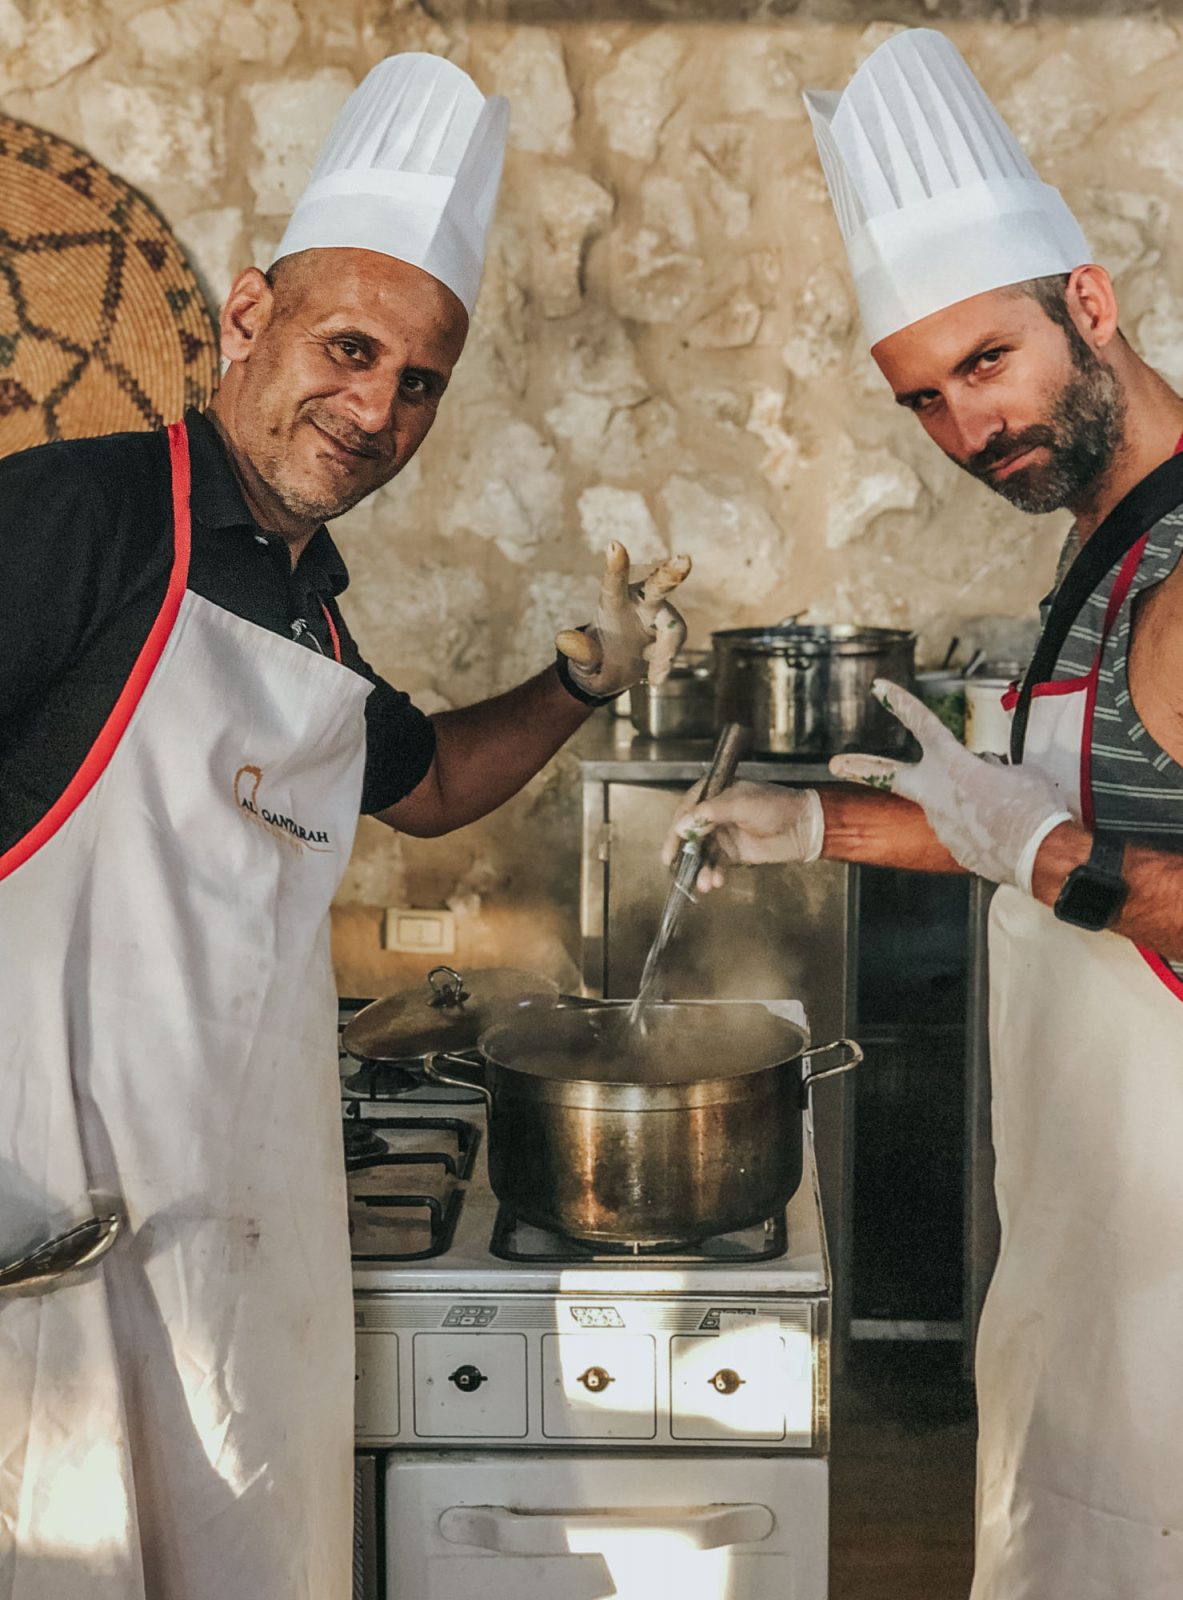 Jordan food cooking class- an eco friendly gift experience